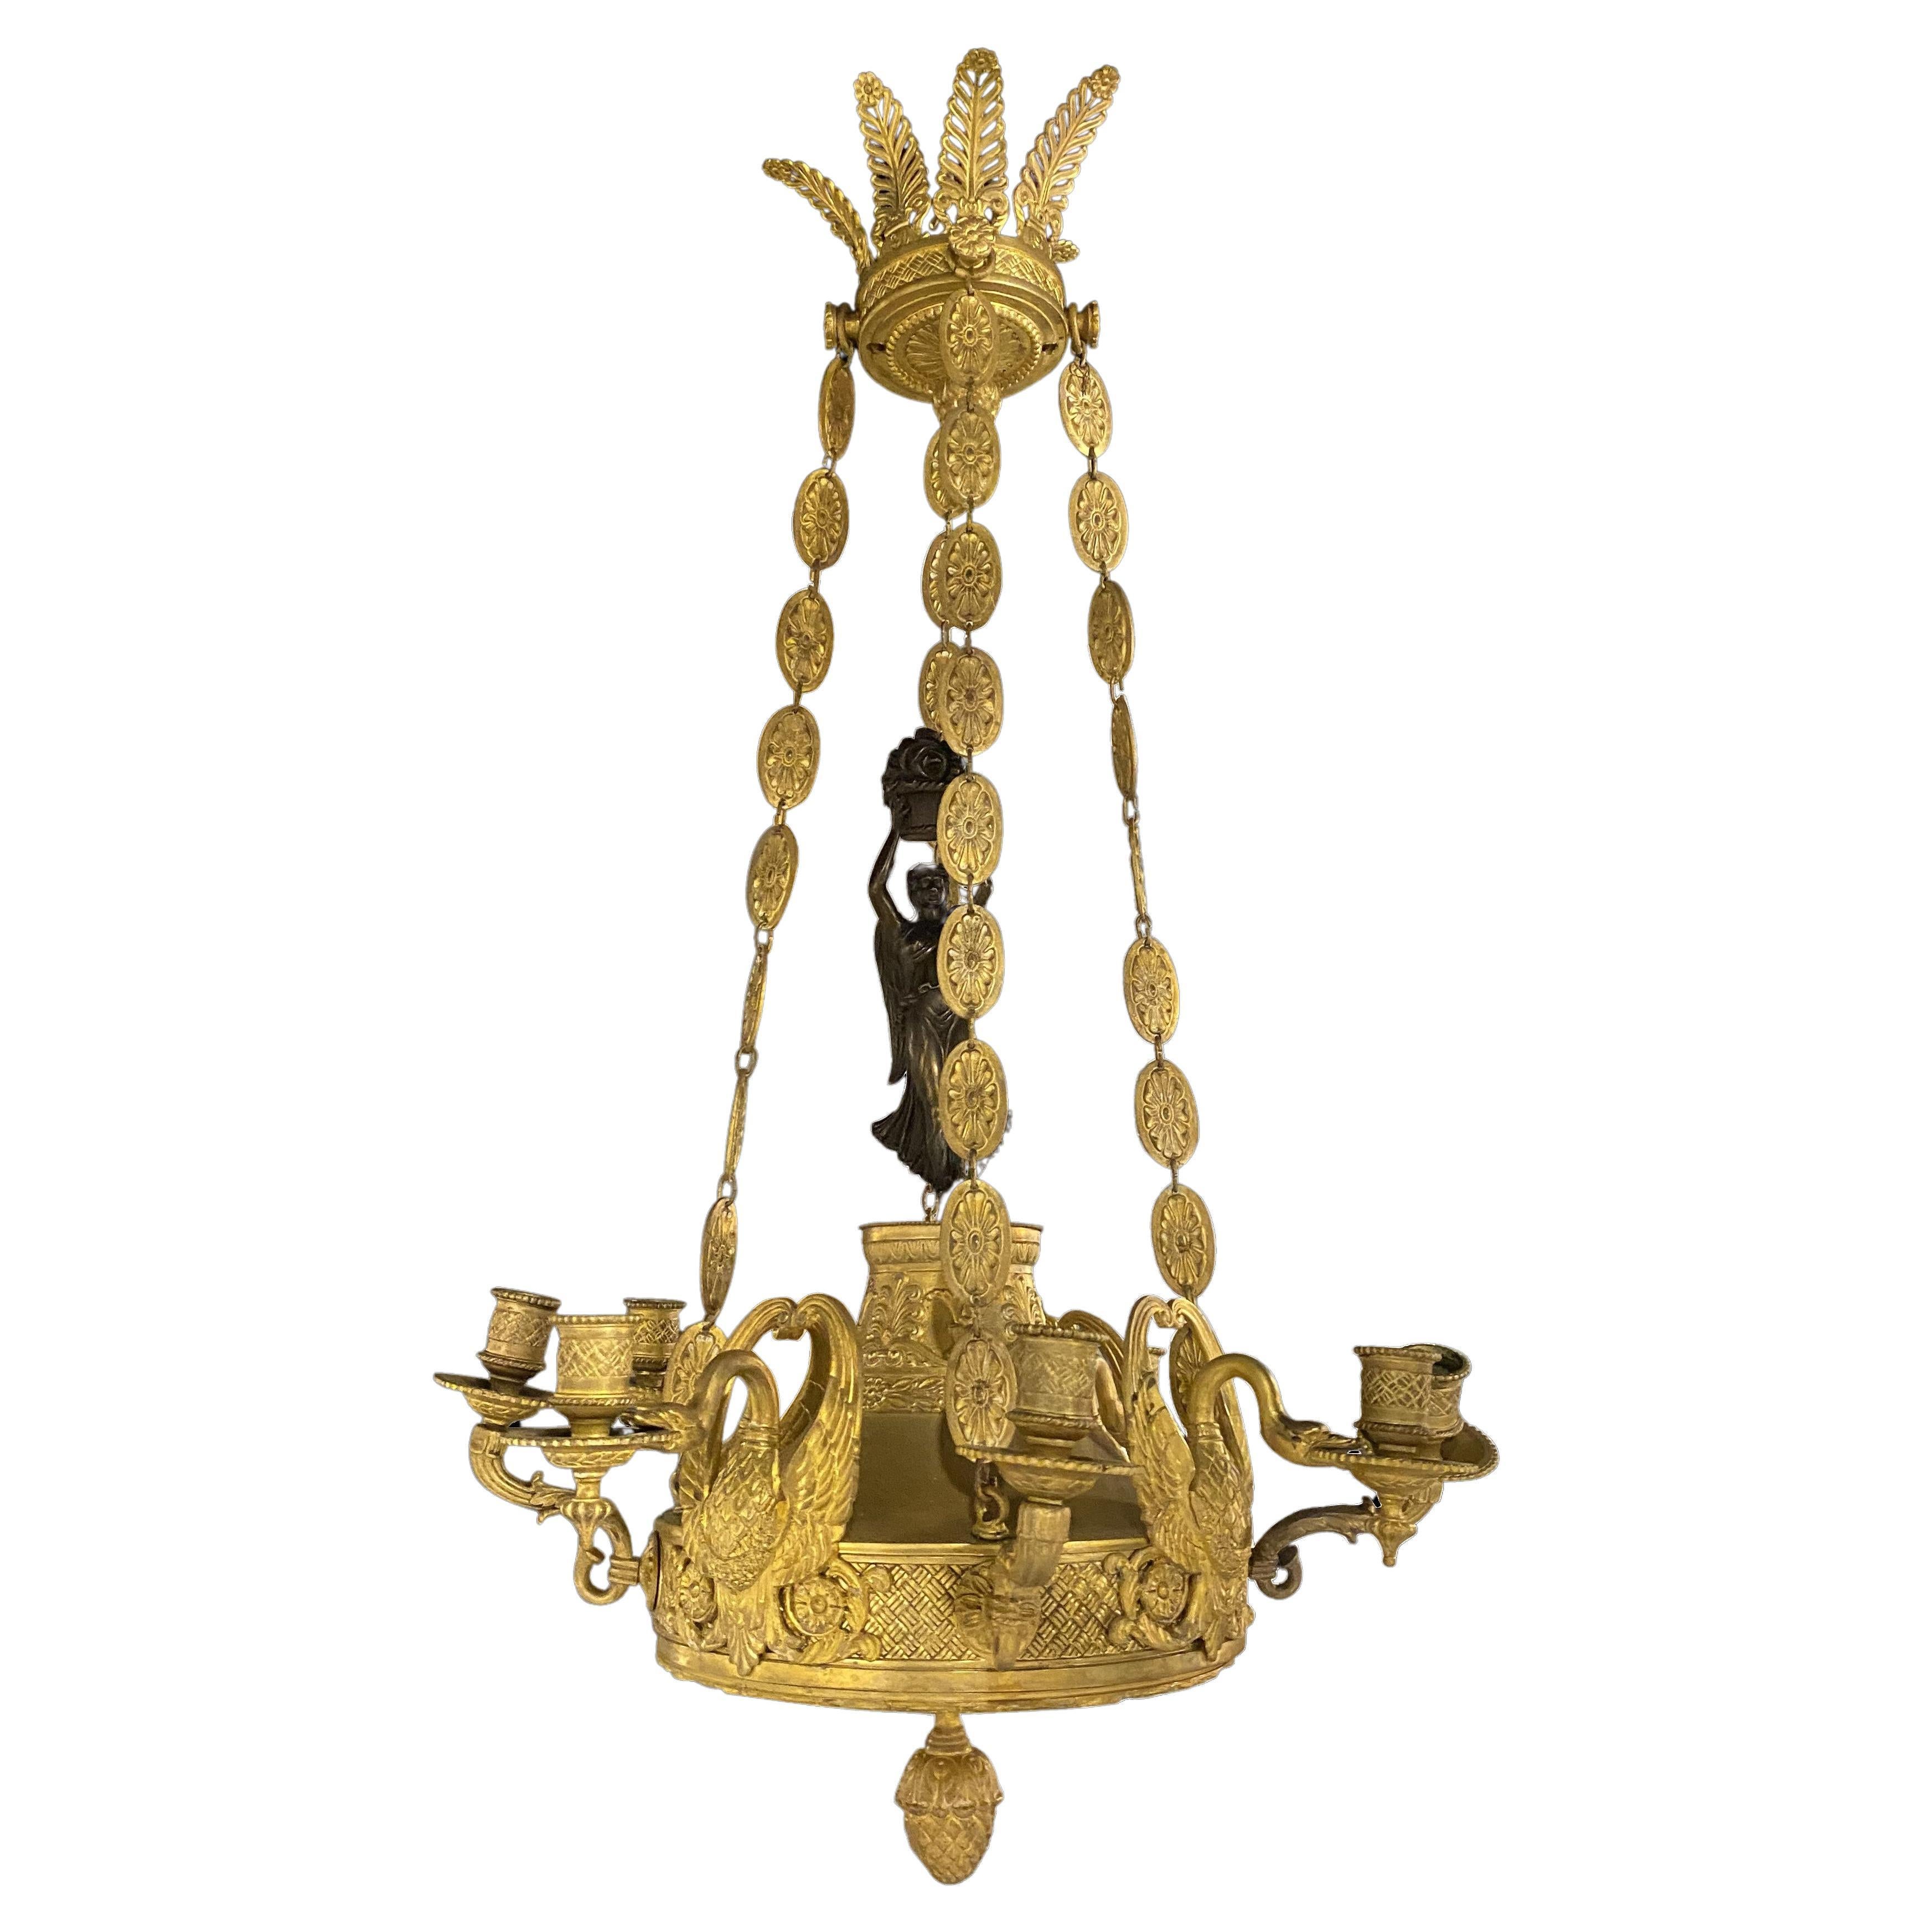 Late 19th Century French Empire chandelier